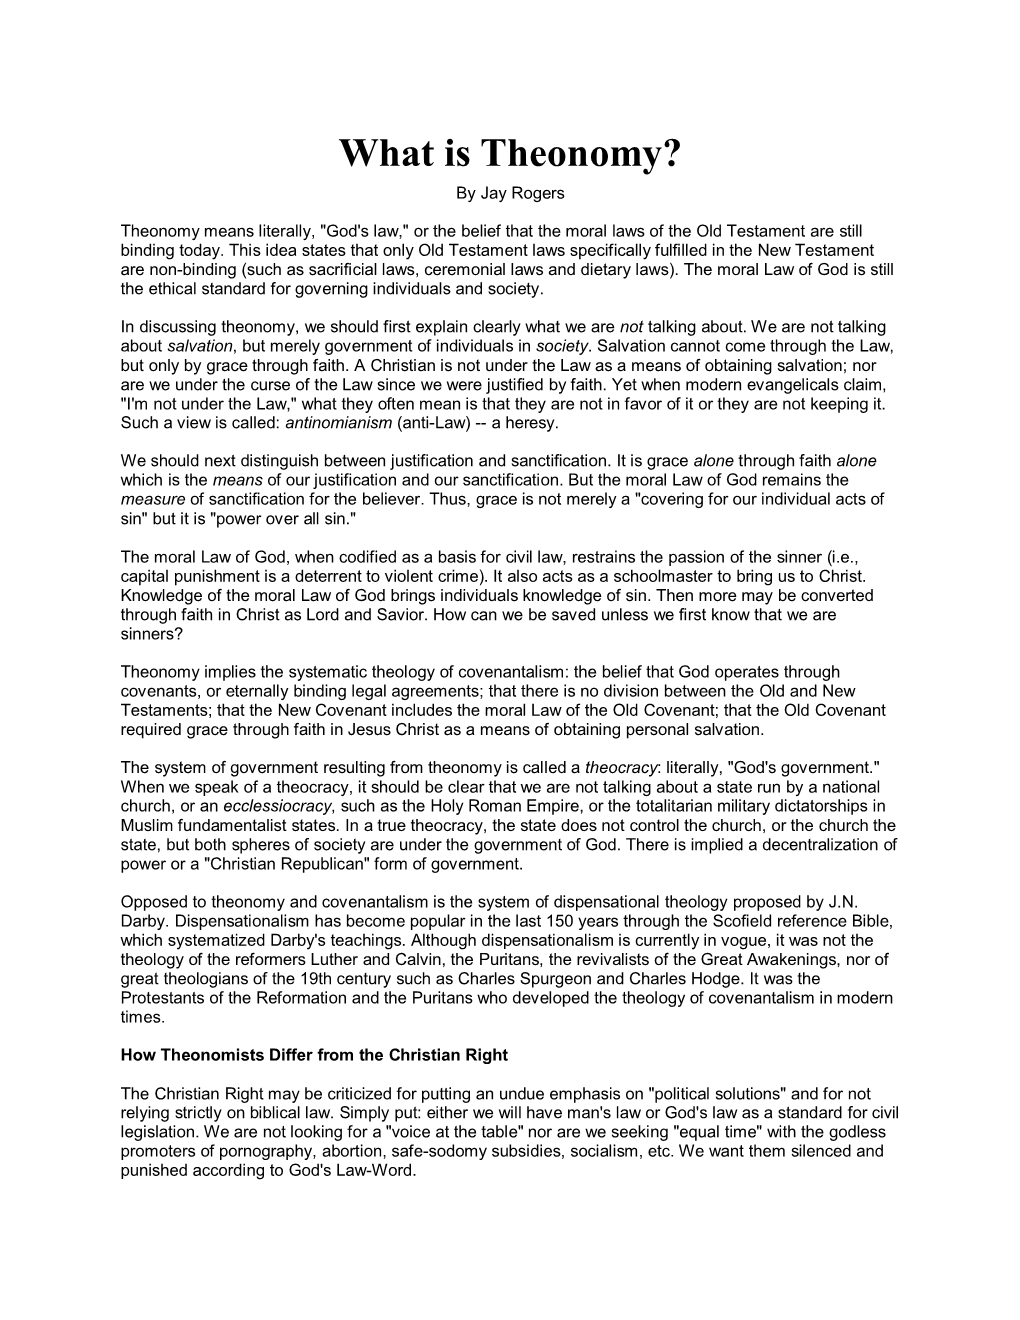 What Is Theonomy? by Jay Rogers